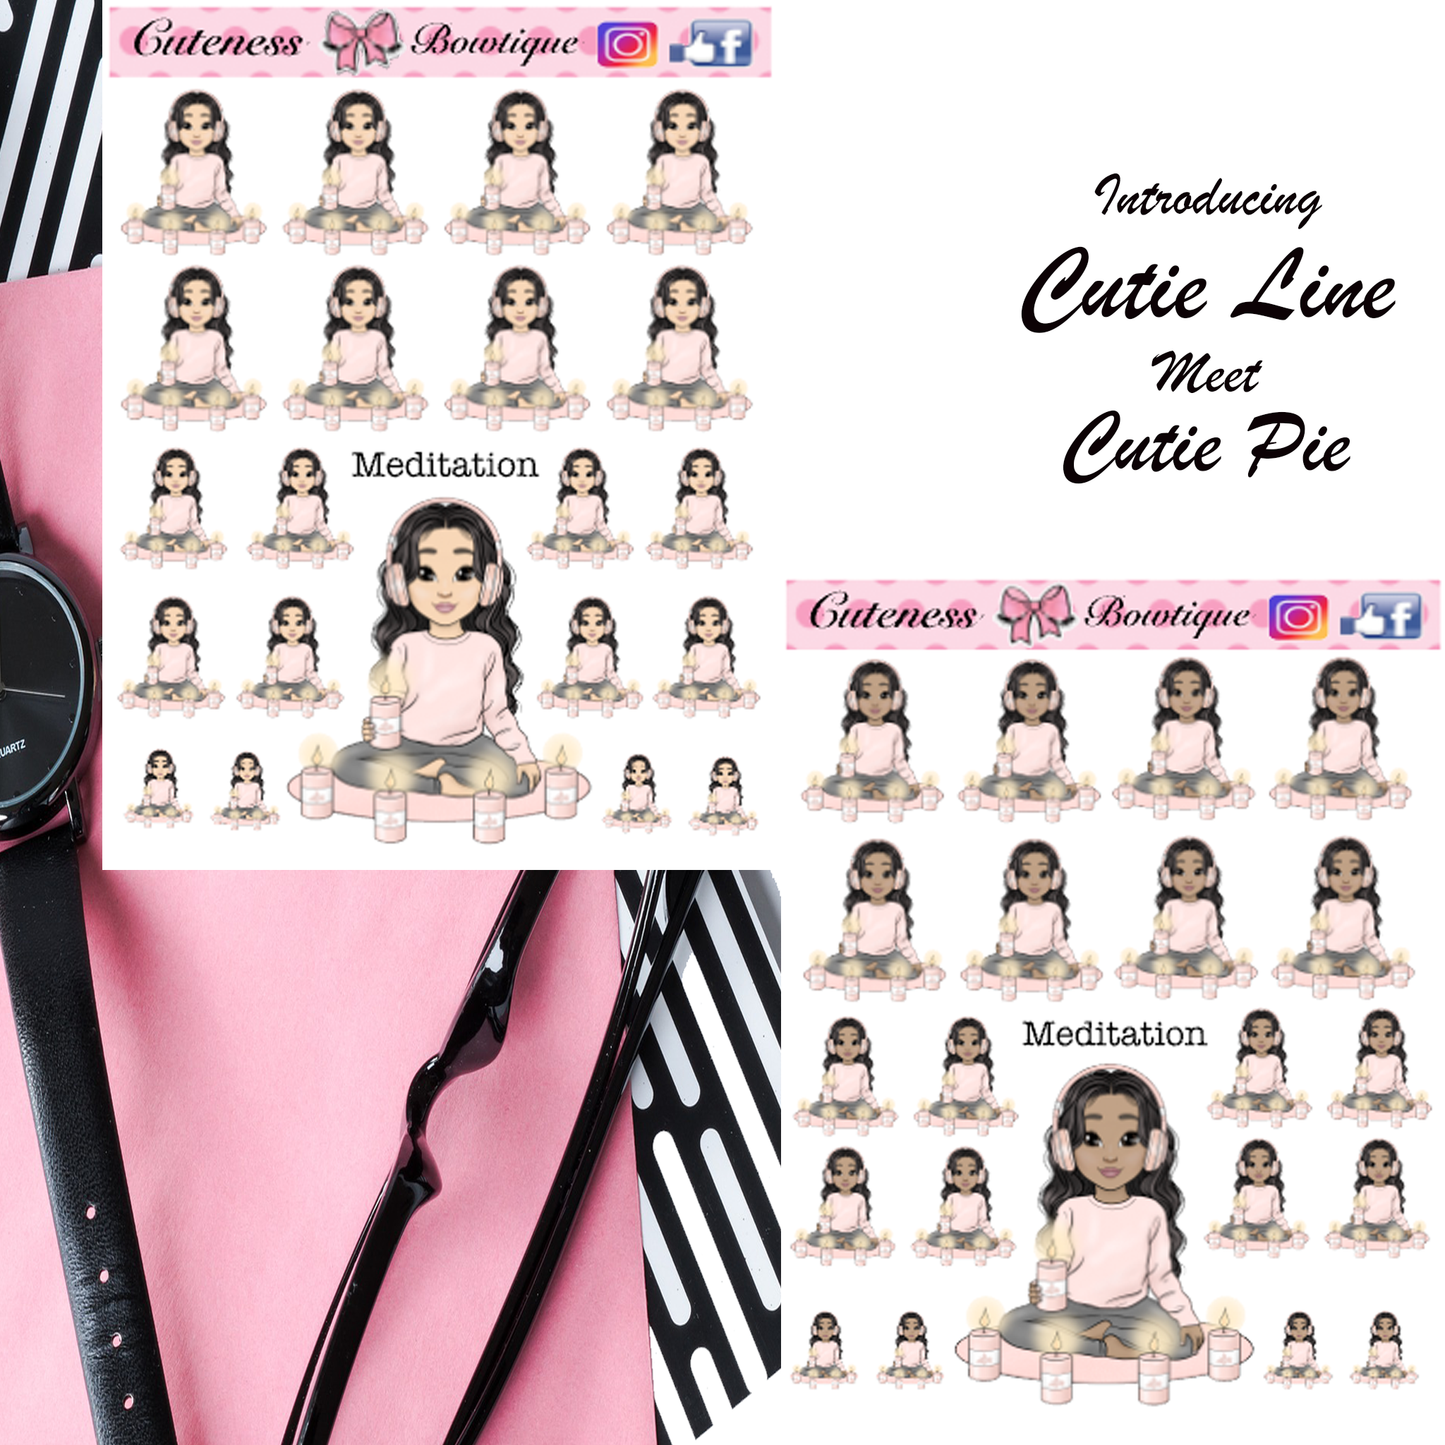 The Cutie Line Icon Sticker Sheet | Cuteness Planner Stickers for Agendas, Planners, Notebooks, Dividers | MEDITATION